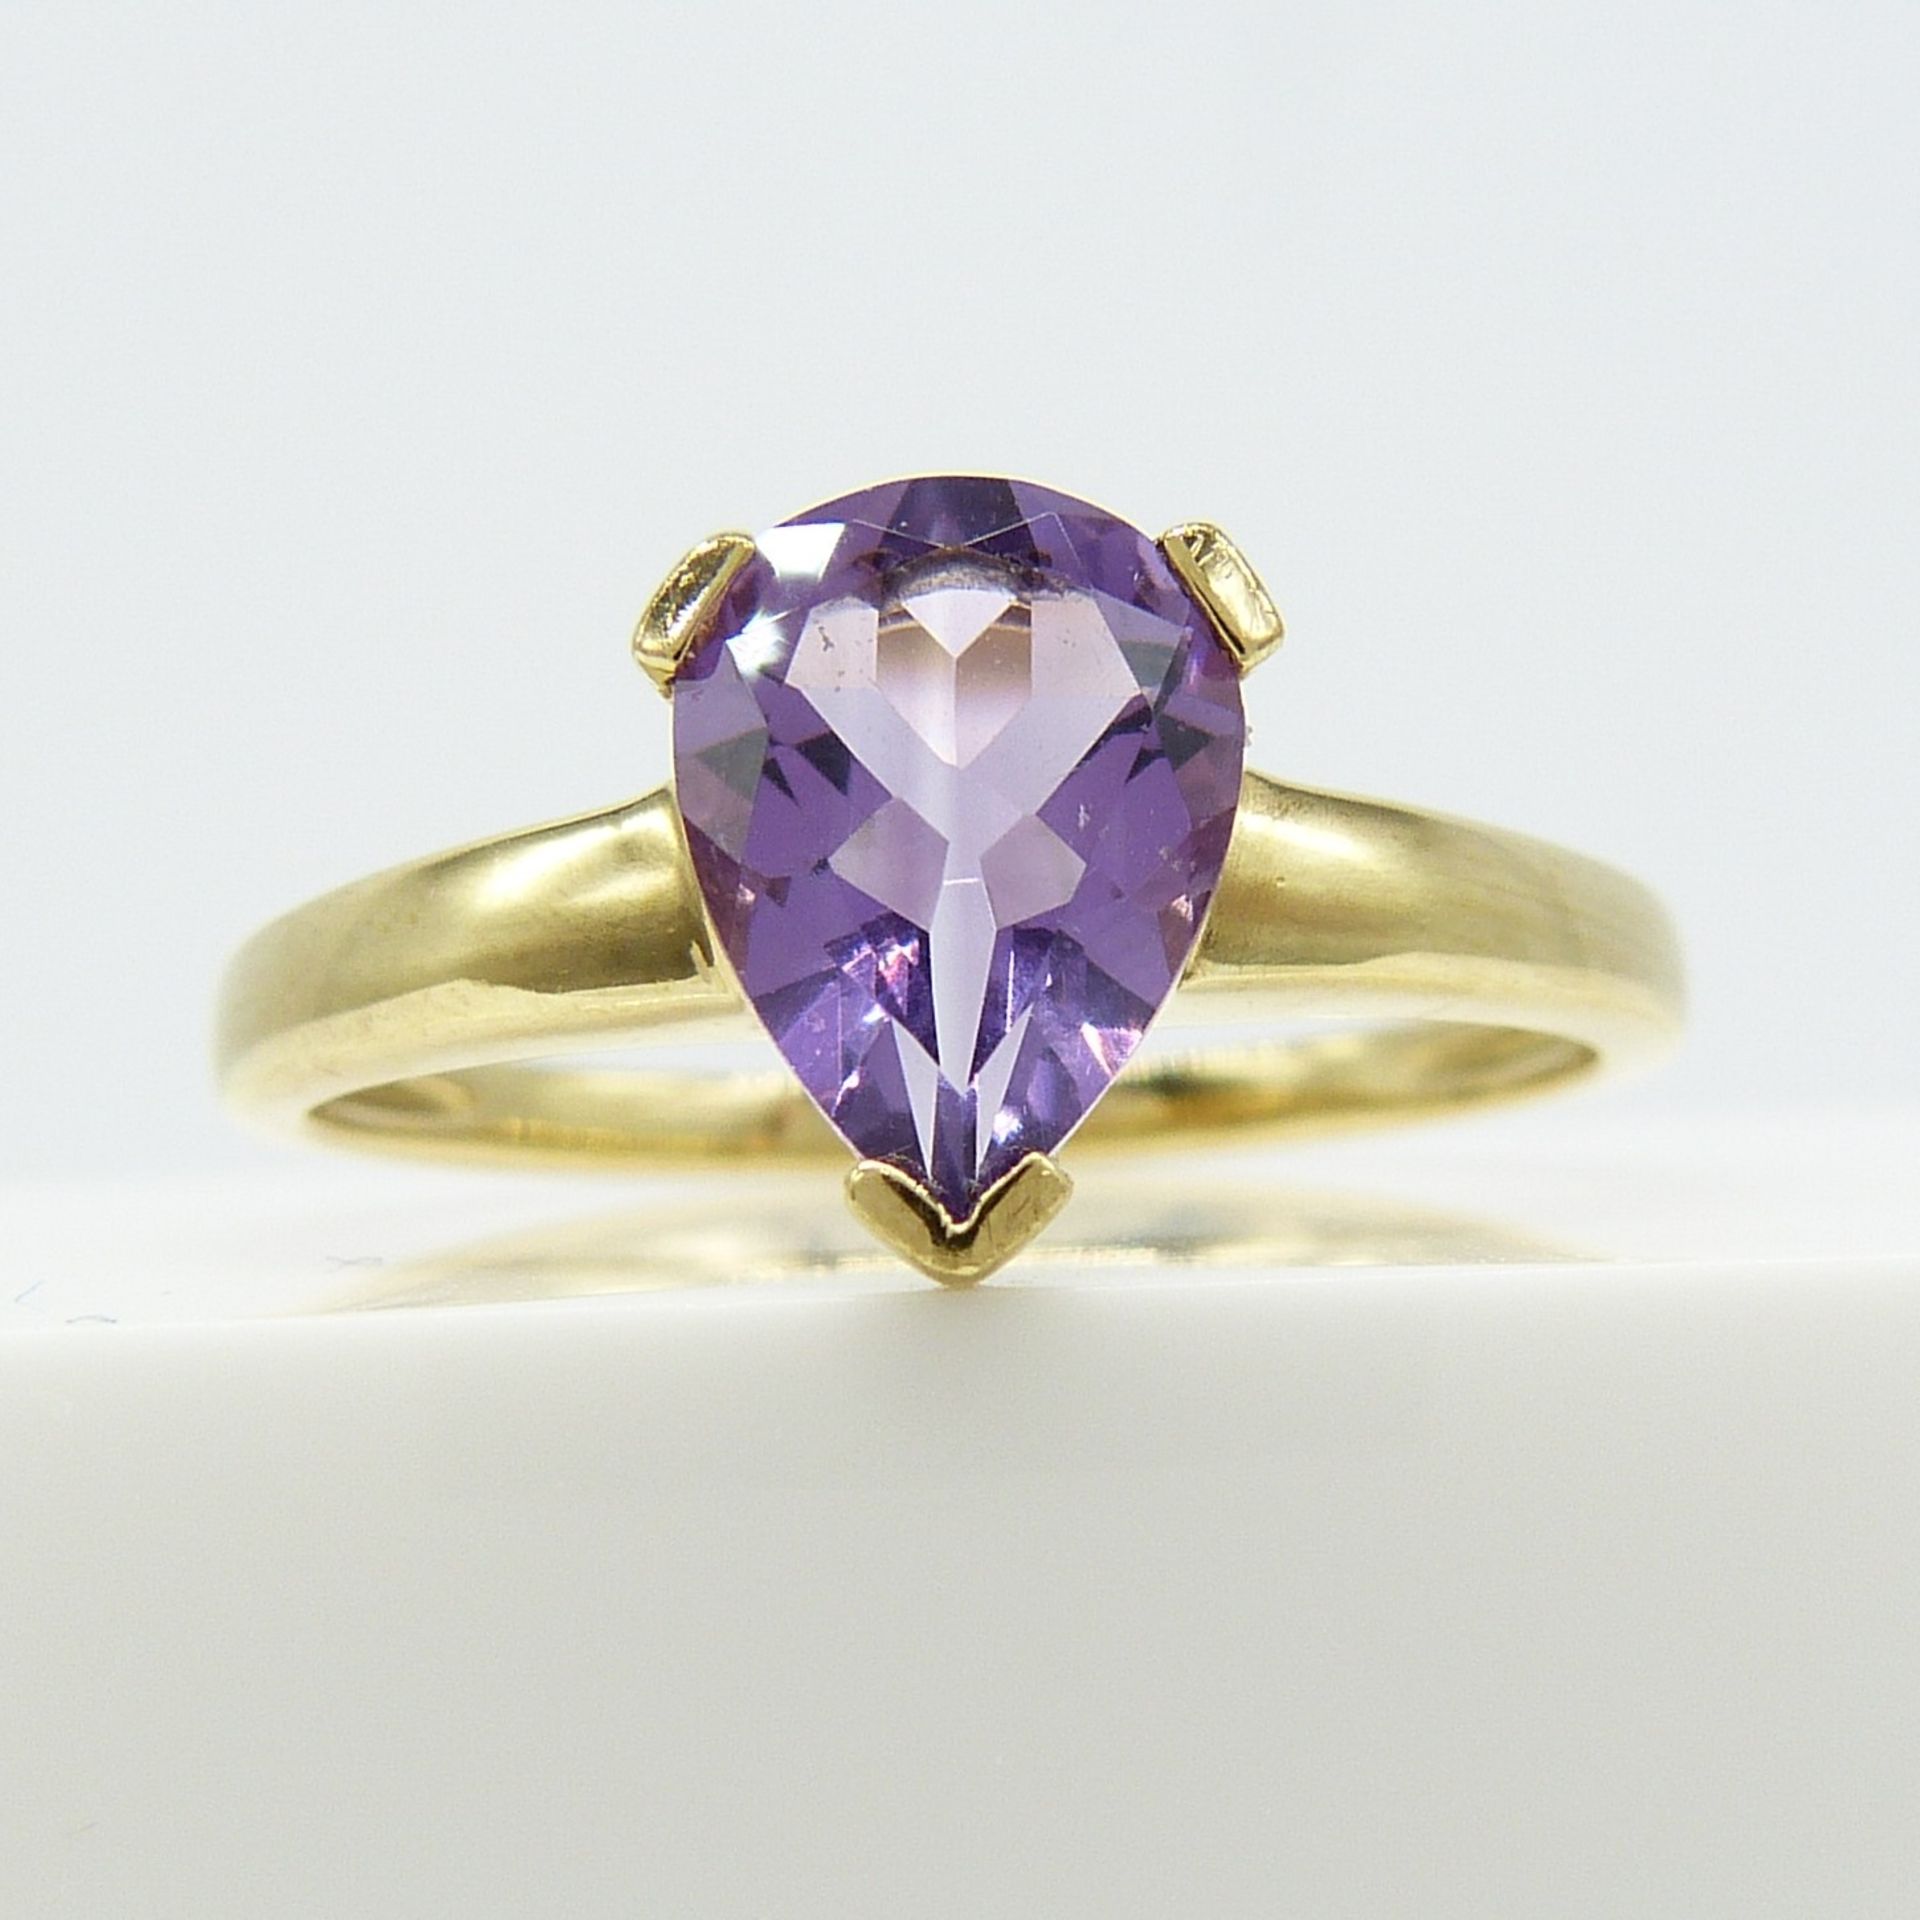 Pear-Cut Amethyst Dress Ring In 9K Yellow Gold - Image 3 of 6